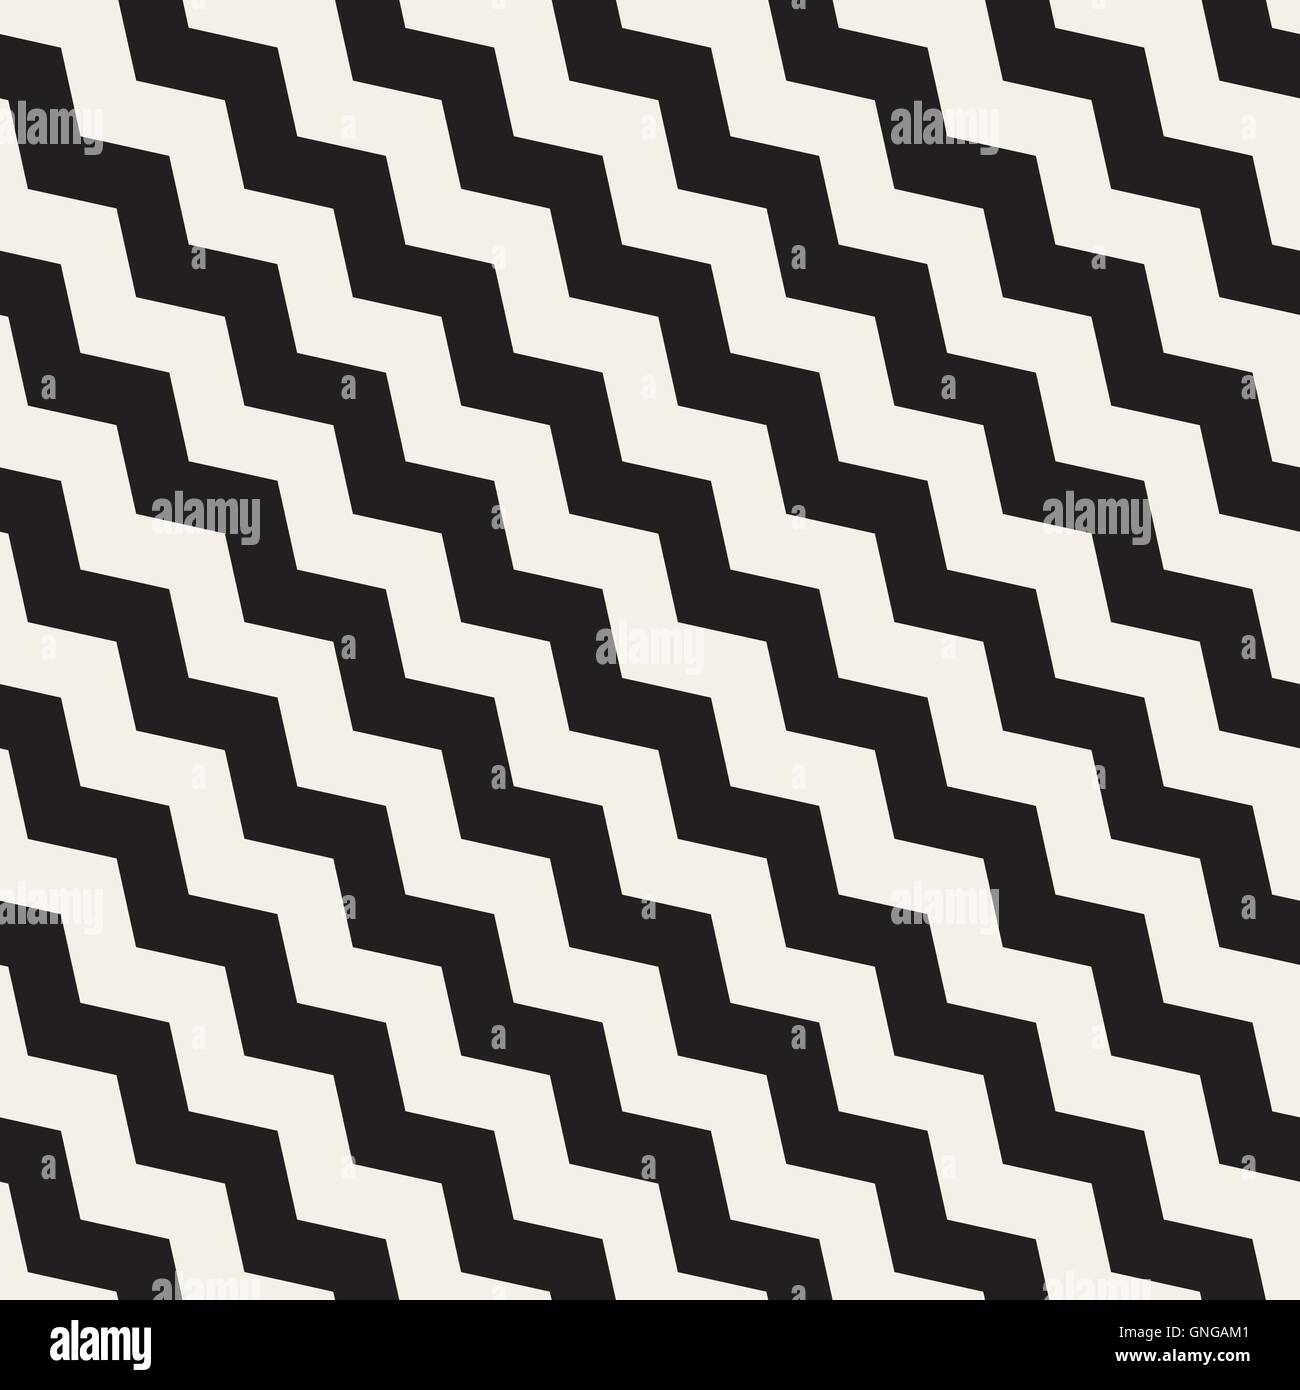 Vector Seamless Black And White ZigZag Diagonal Lines Geometric Pattern Stock Vector